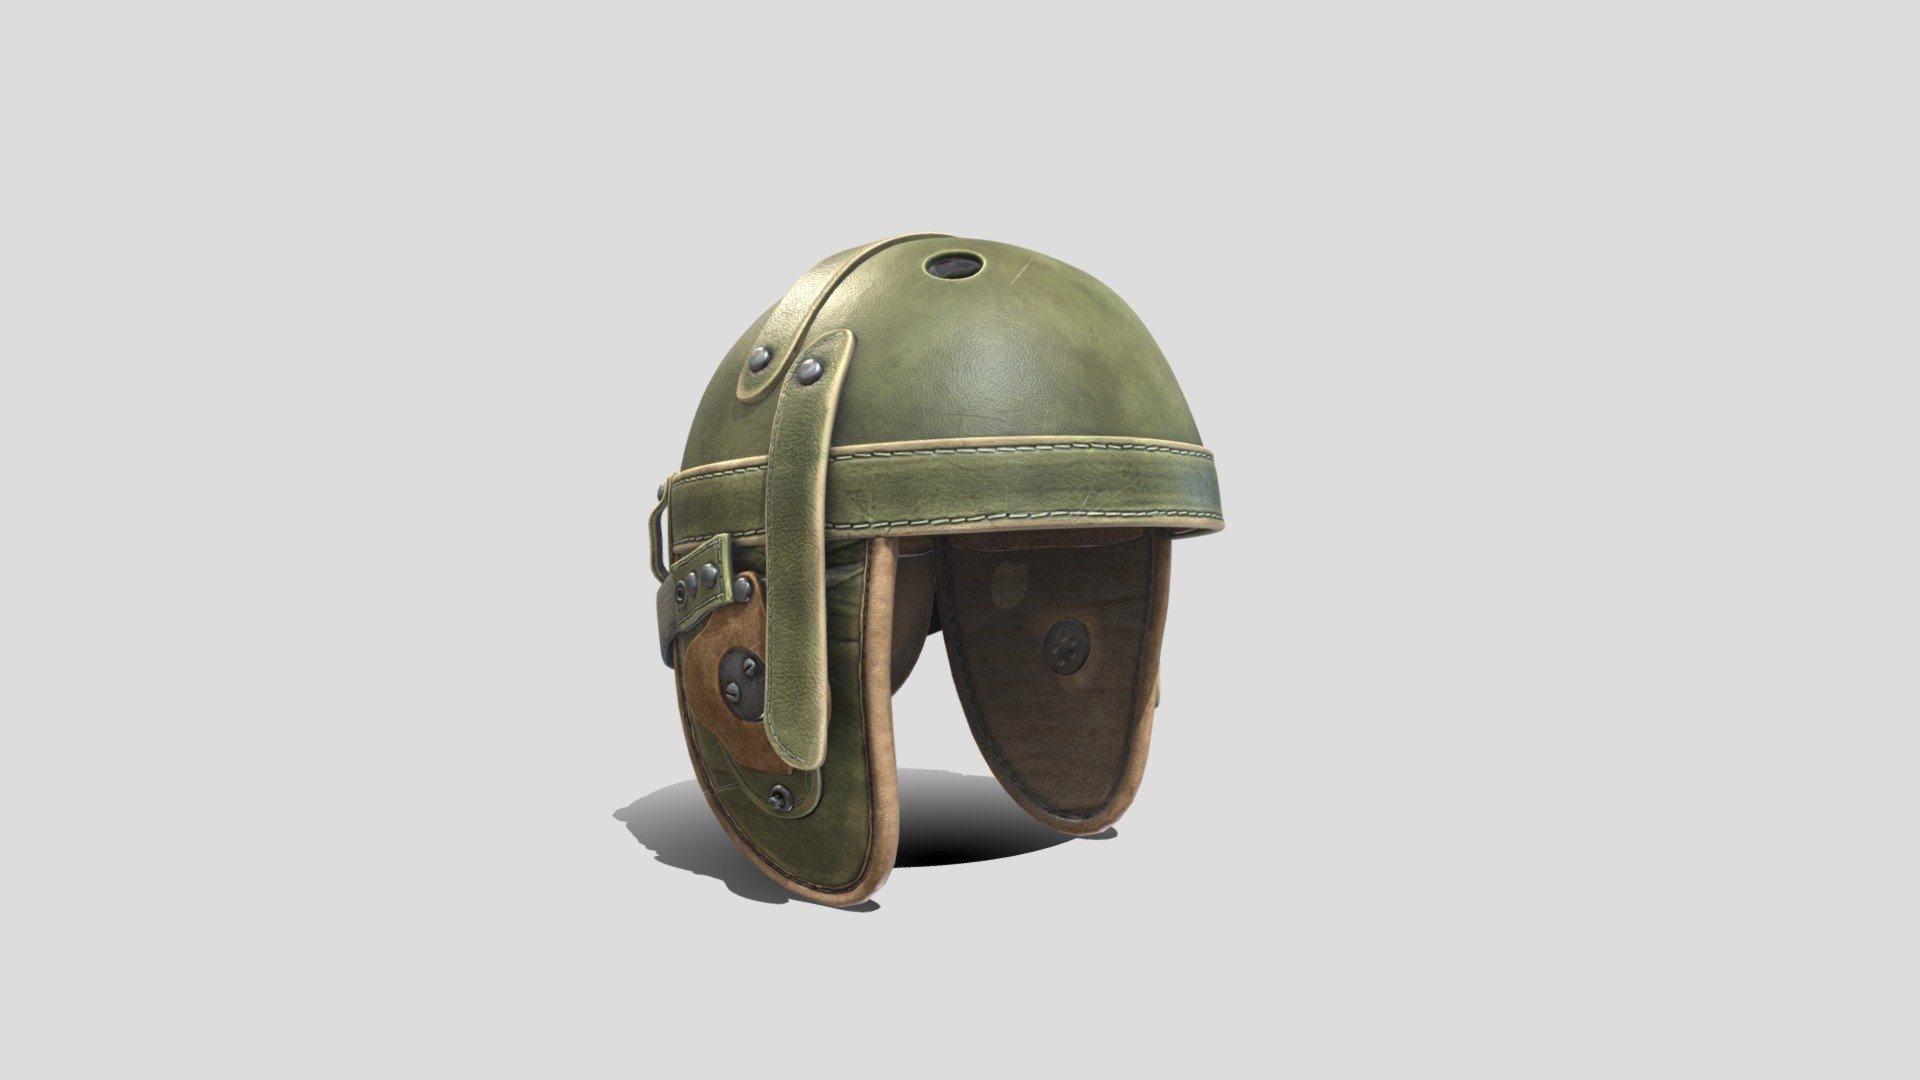 Vintage Military Tankers Helmet from ww2 game ready 3d model

This model is suitable for use in (game engines, broadcast, high-res film closeups, advertising, animations, visualizations)

FEATURES:

-High-quality polygonal model -Models resolutions are optimized for polygon efficiency medium poly -Model is fully textured with all materials applied-Logicaly named materials and textures -No special plugin needed to open scene. -Fully Unwrapped Uvs, non-overllaping -units used cm

TEXTURES

4096x4096 color normal metal rough (pbr) - Vintage Tankers Helmet Game Ready - Buy Royalty Free 3D model by Pbr_Studio (@pbr.game.ready) 3d model